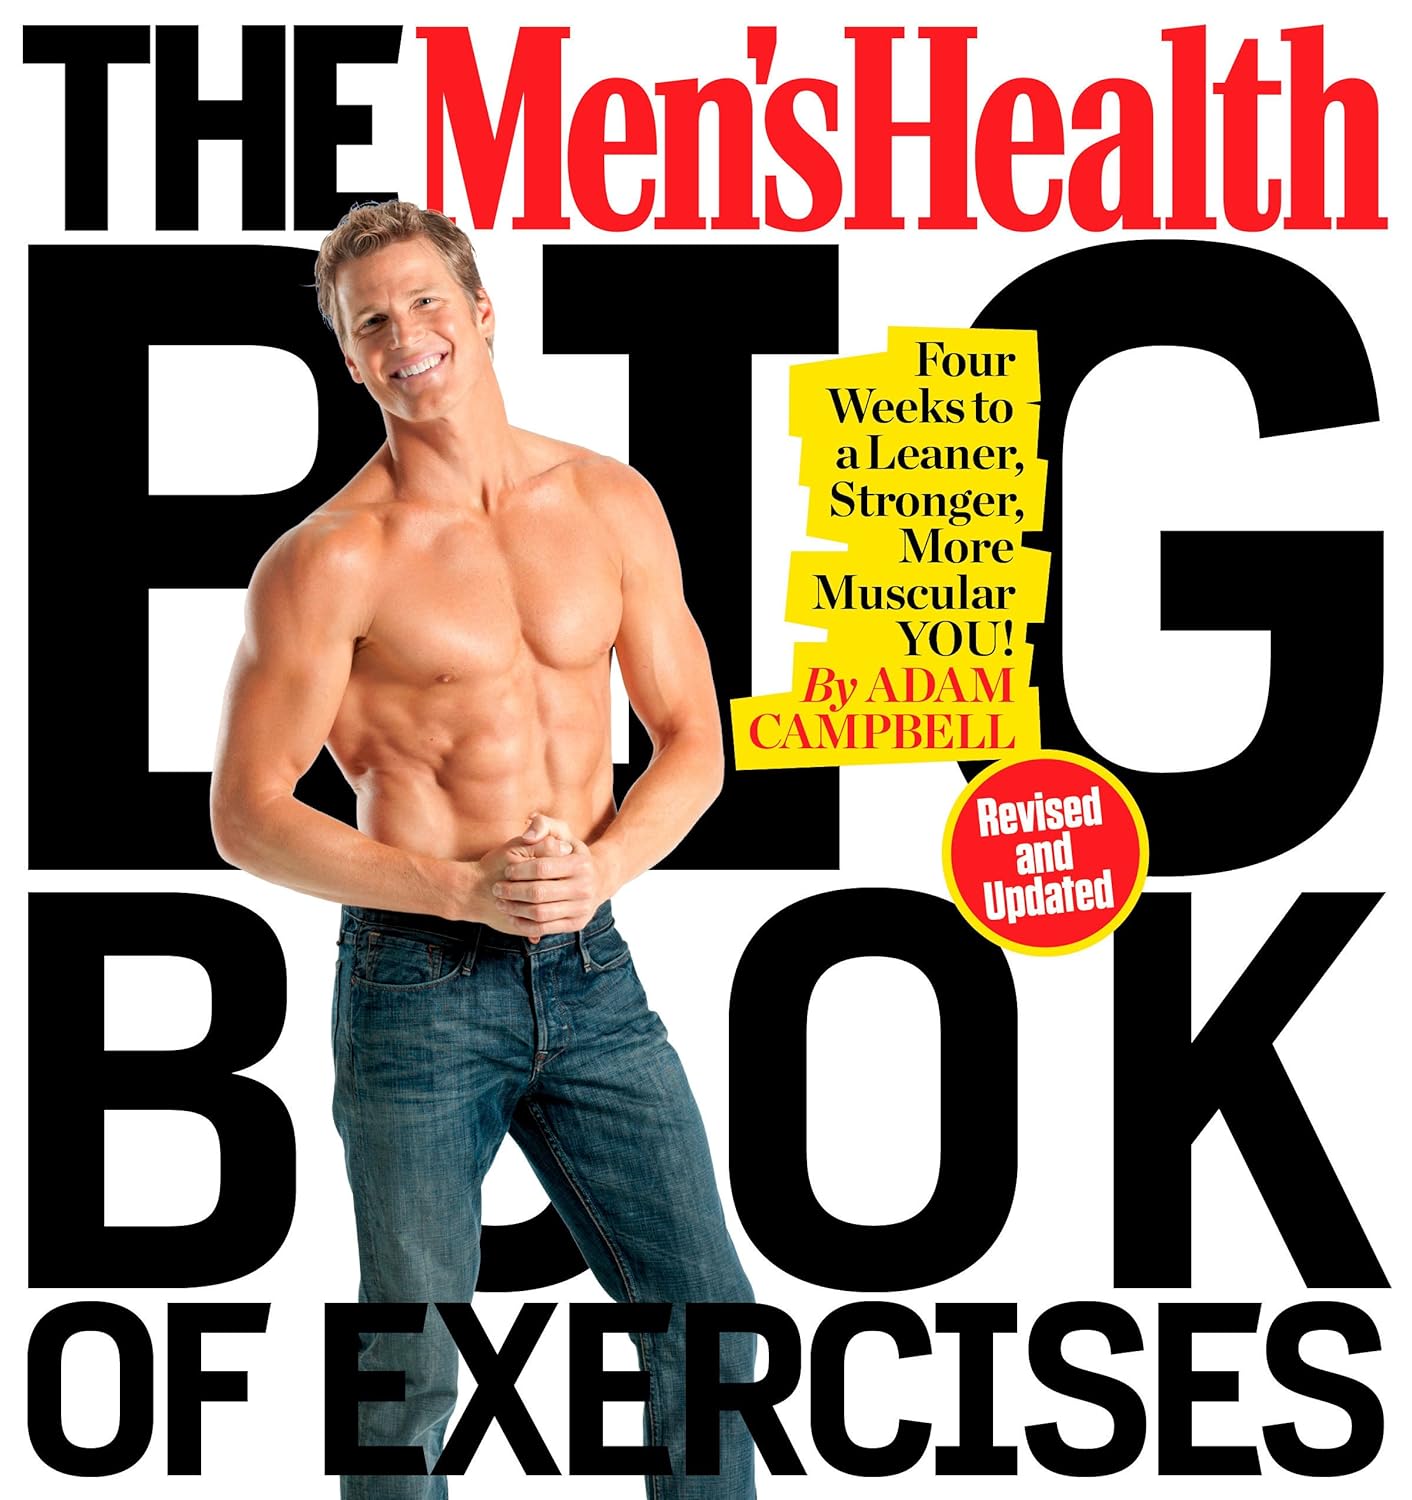 The Mens Health Big Book of Exercises: Four Weeks to a Leaner, Stronger, More Muscular You!     Paperback – October 25, 2016